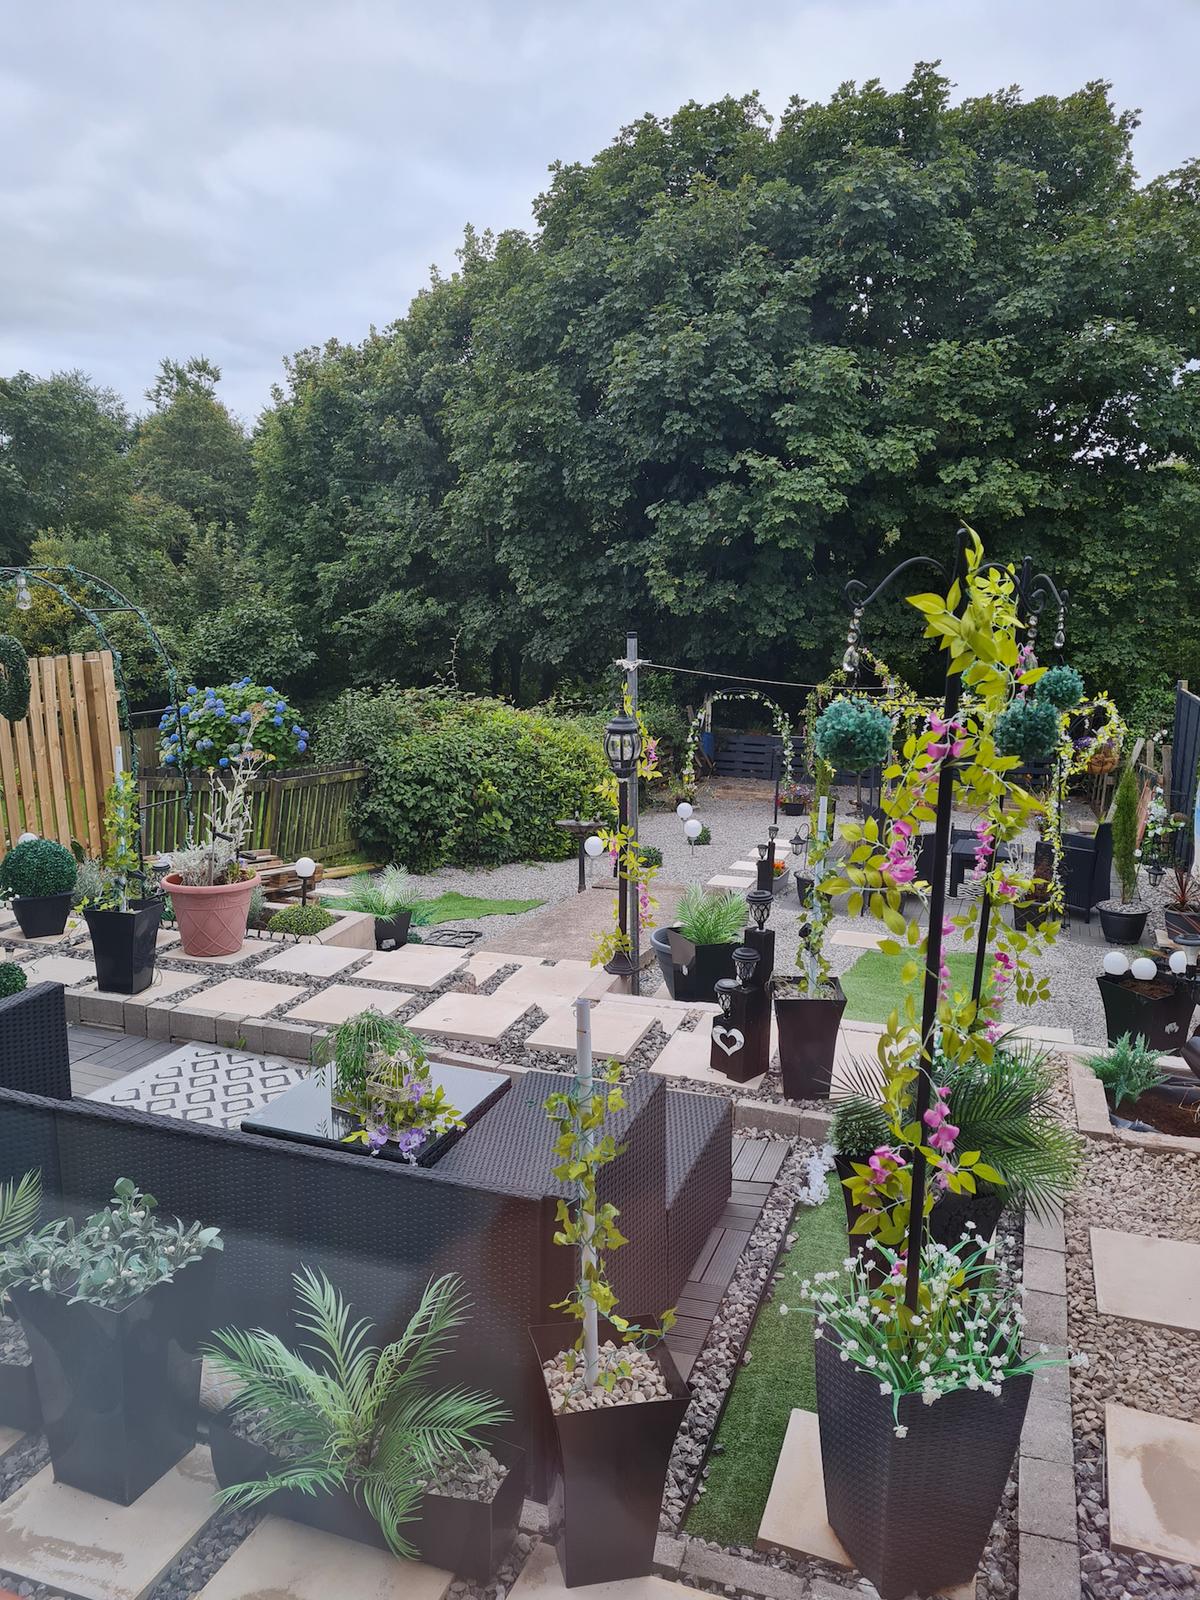 The completed garden. (Courtesy of Caters News)